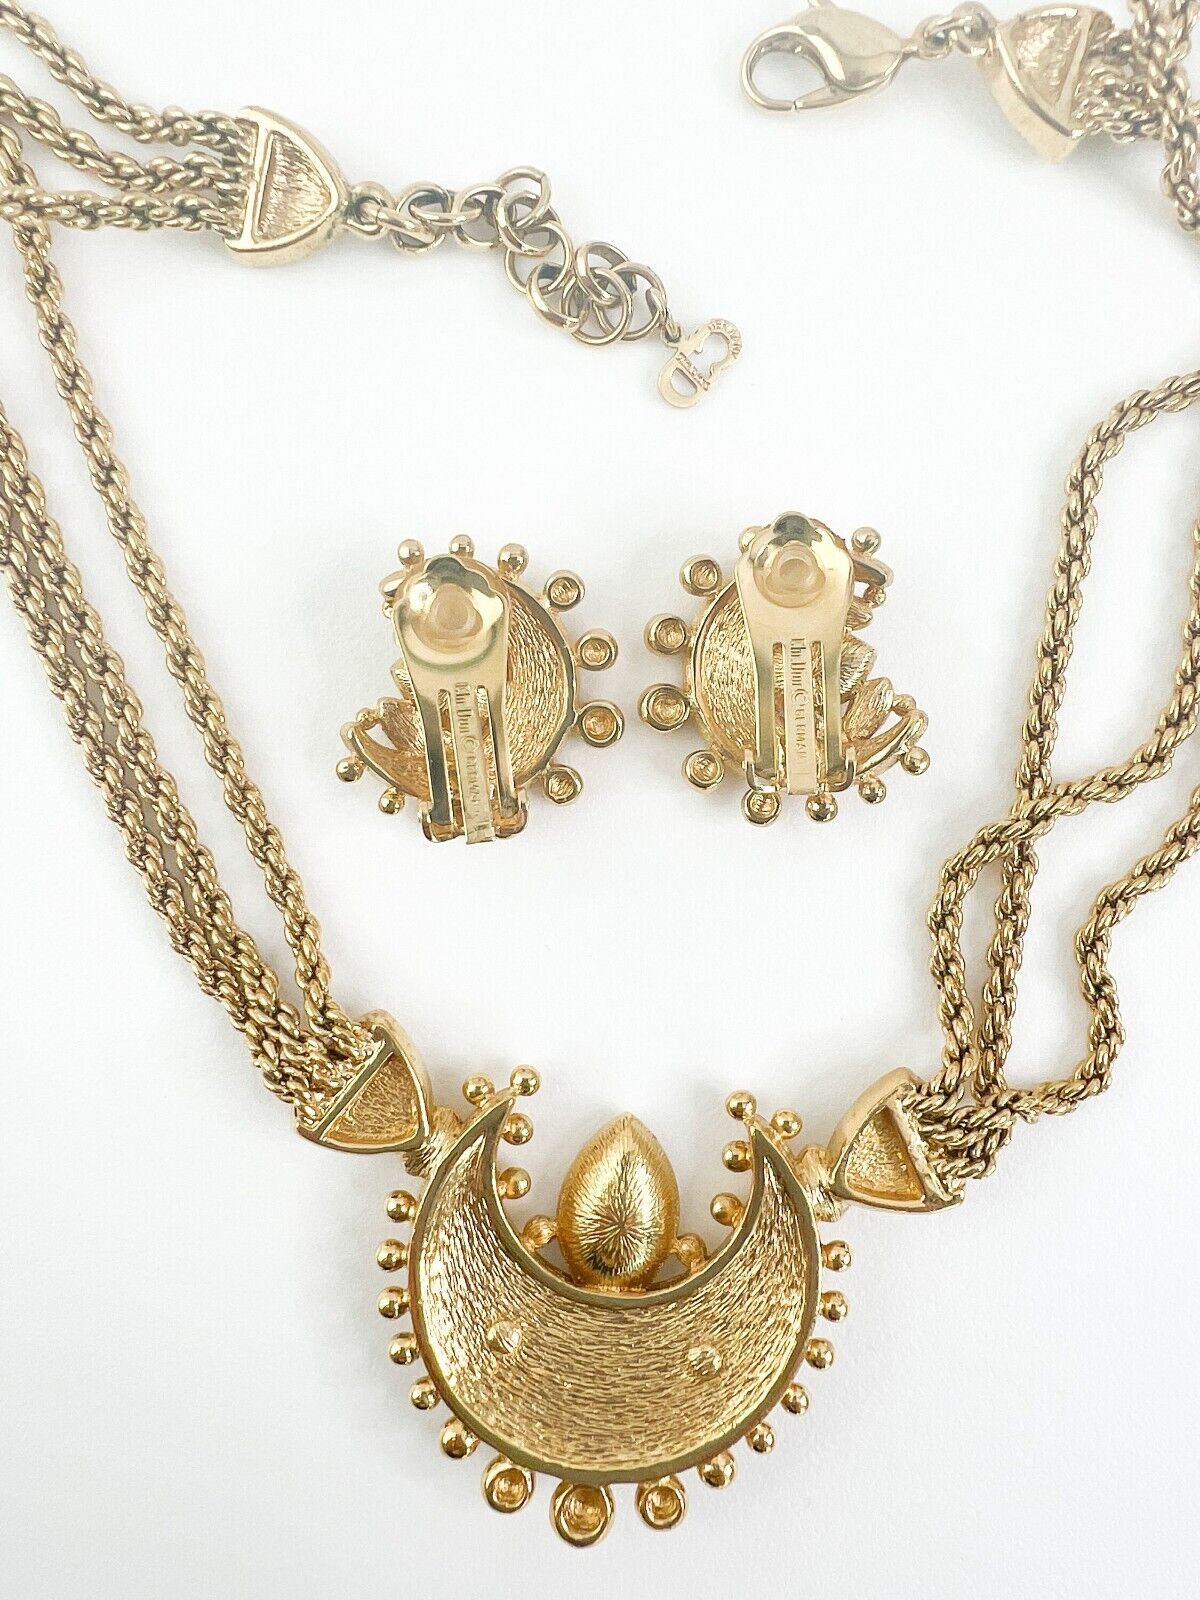 Vintage Christian Dior Set necklace Earrings, Jewelry Sets, moon Charm necklace, Vintage Earrings, choker Gold, Gift for her, Jewelry gold